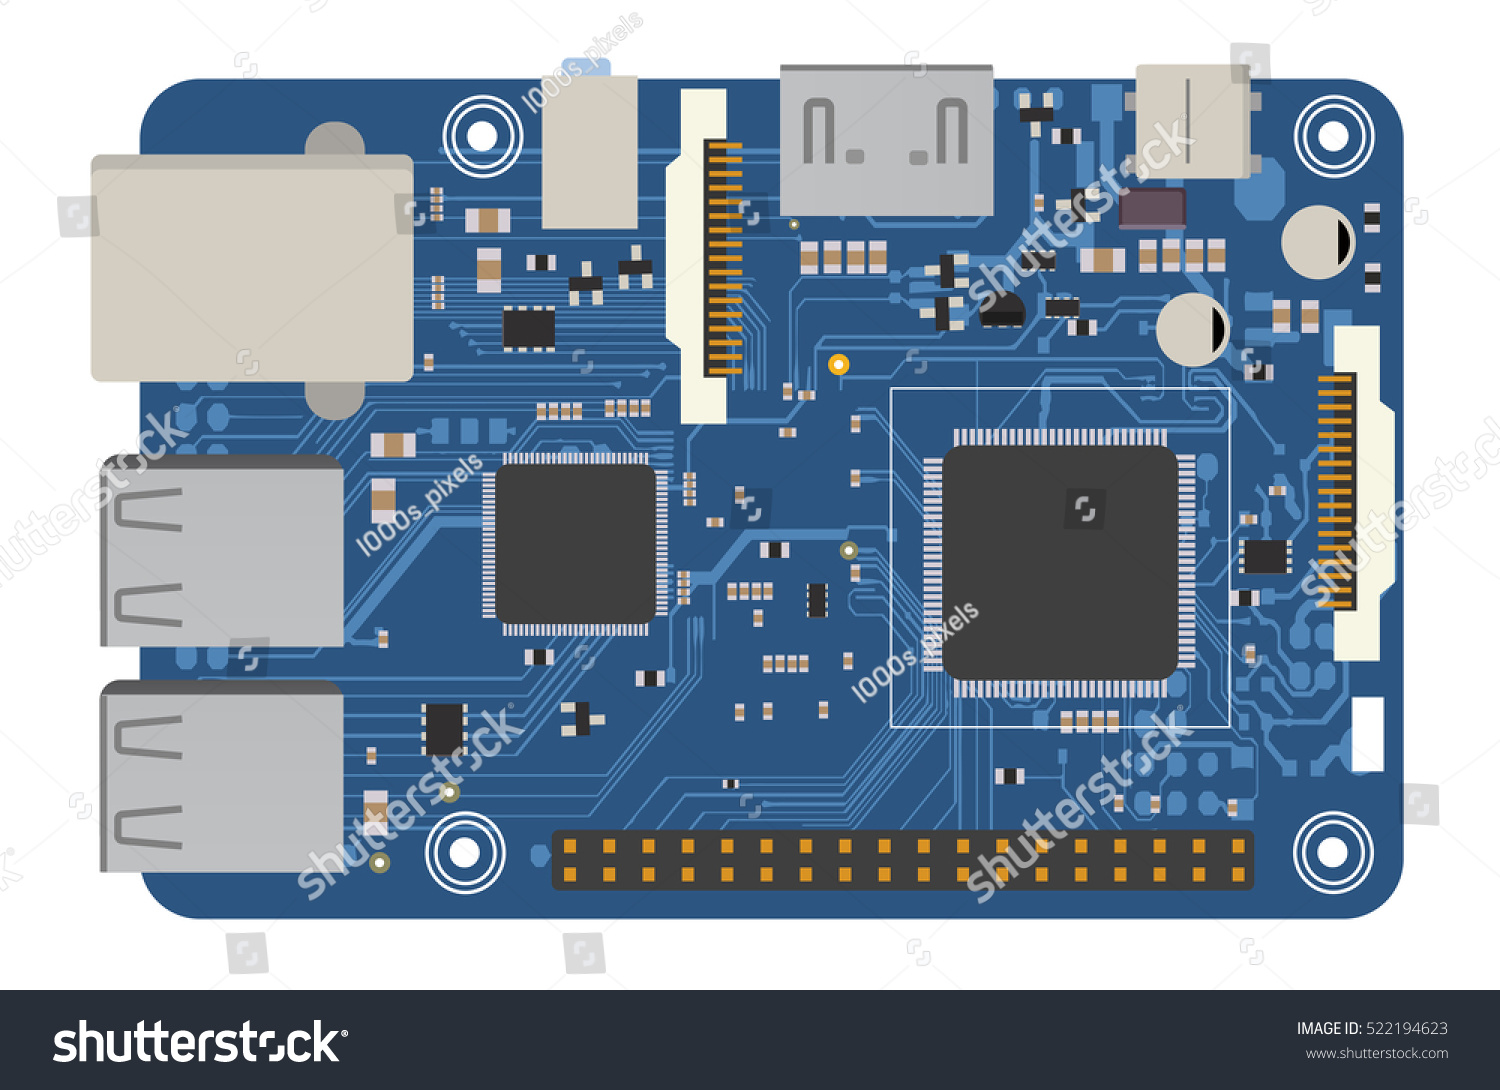 SVG of DIY electronic mega board with a microprocessor, interfaces, LEDs, connectors, and other electronic components, to form the basic of smart home, robotic, and many other projects related to electronics svg